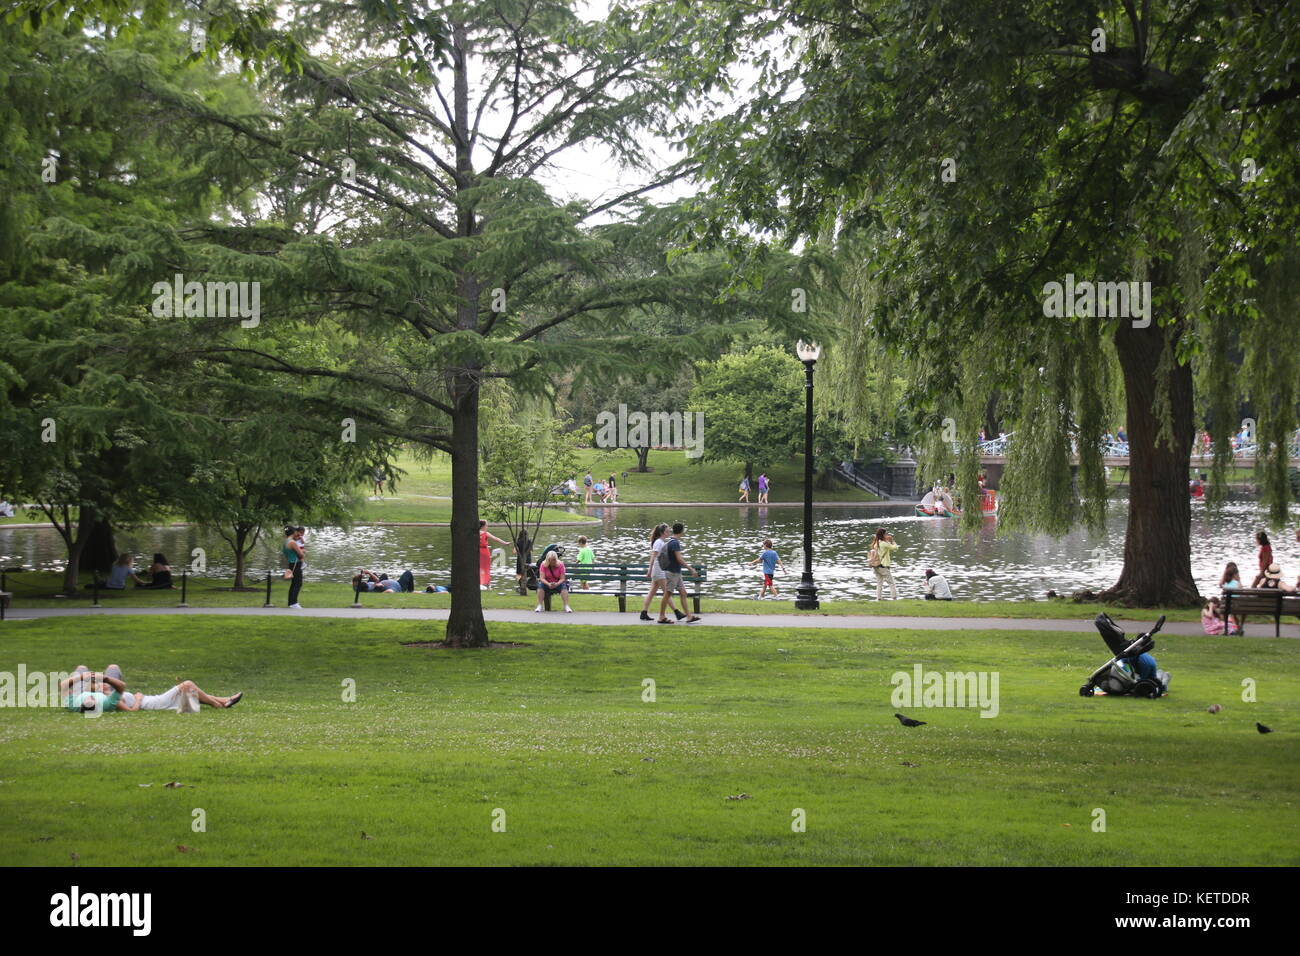 Sunday in the Park Stock Photo - Alamy